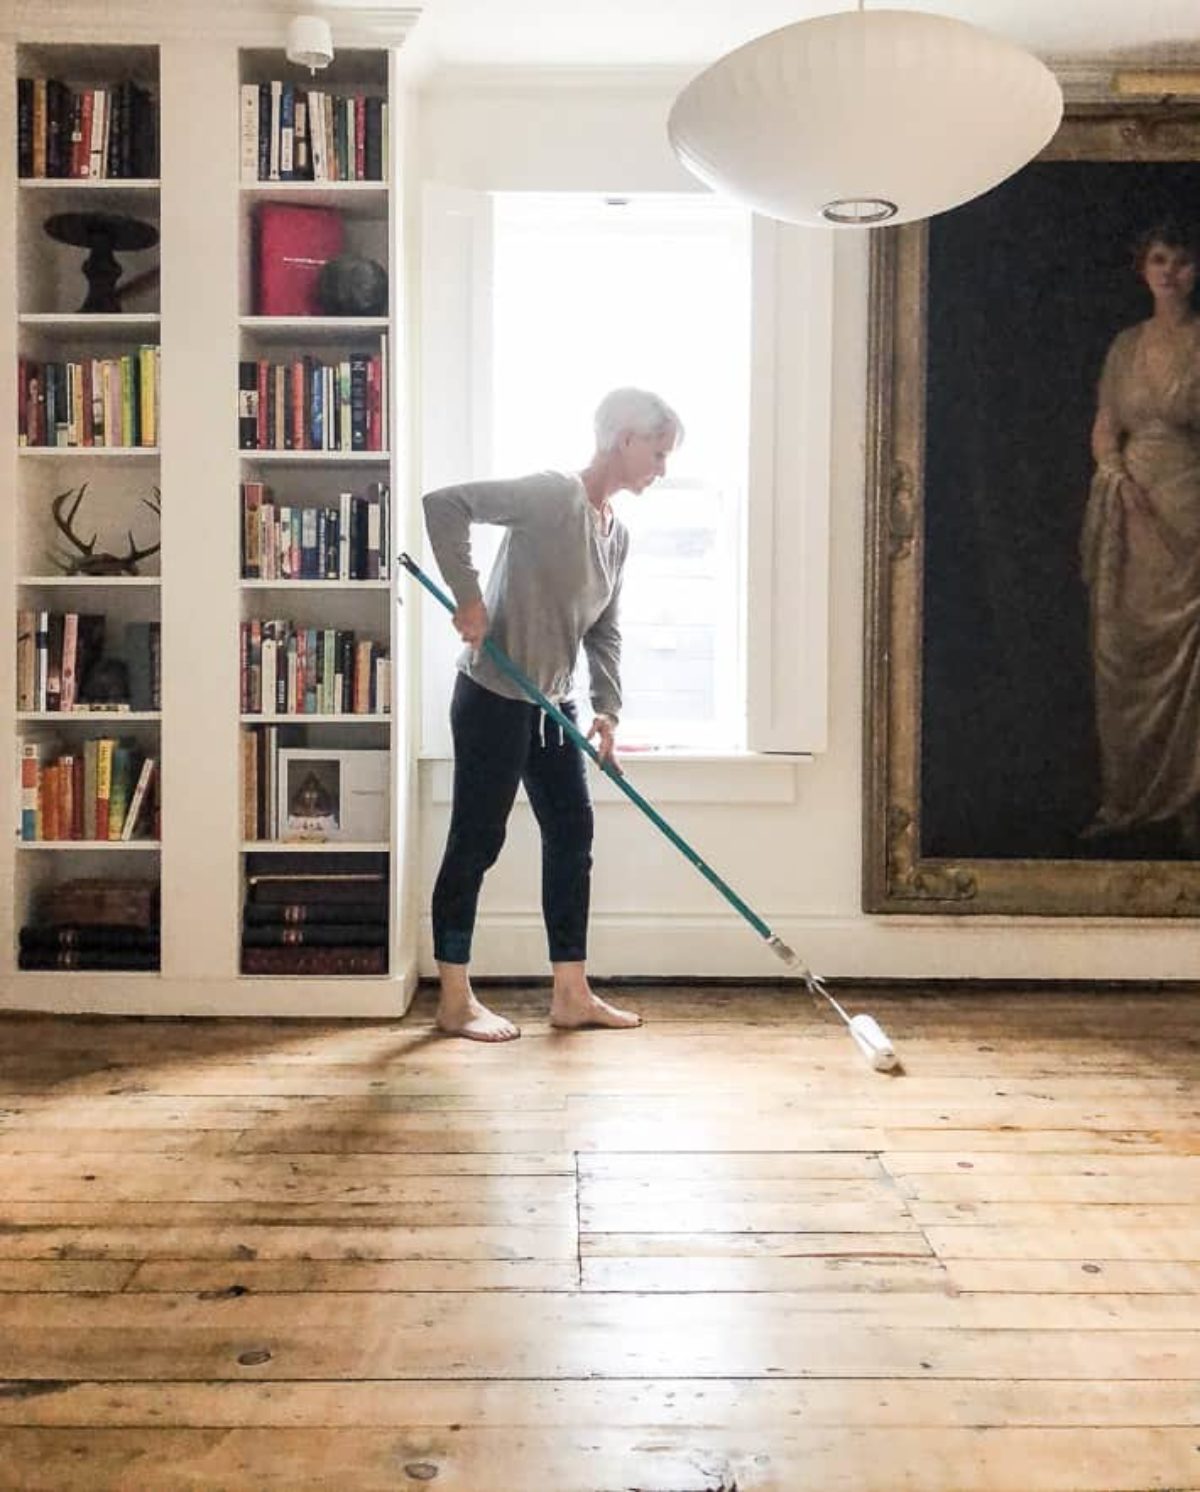 A Modern Way To Refinish Old Floors